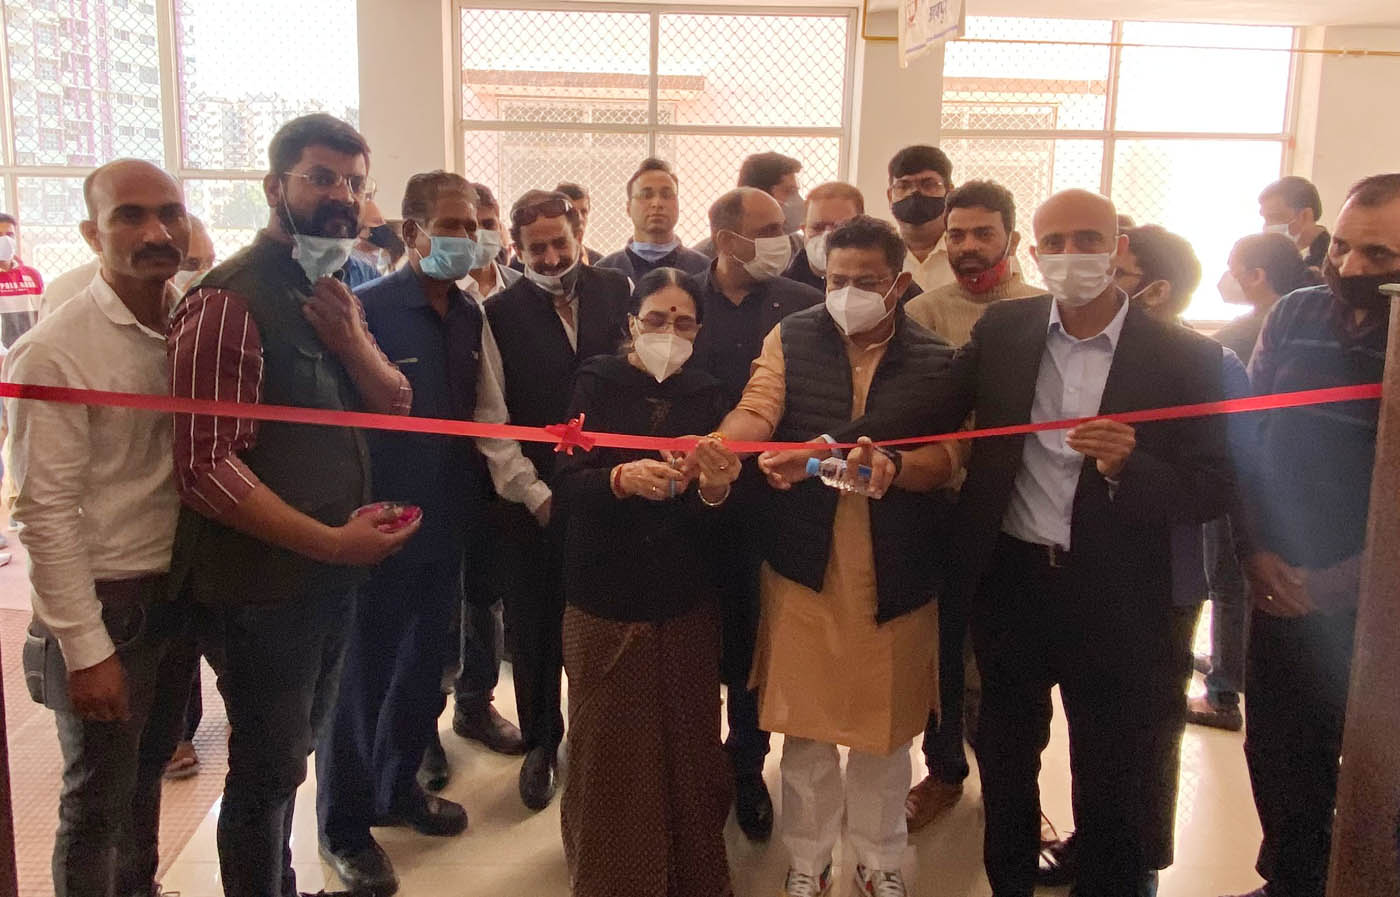 NEW 50 ICU BEDDED COVID FACILITY AT UDAIPUR COMMUNITY HEALTH CENTRE INAUGRATED AS PART OF LG ELECTRONICS 